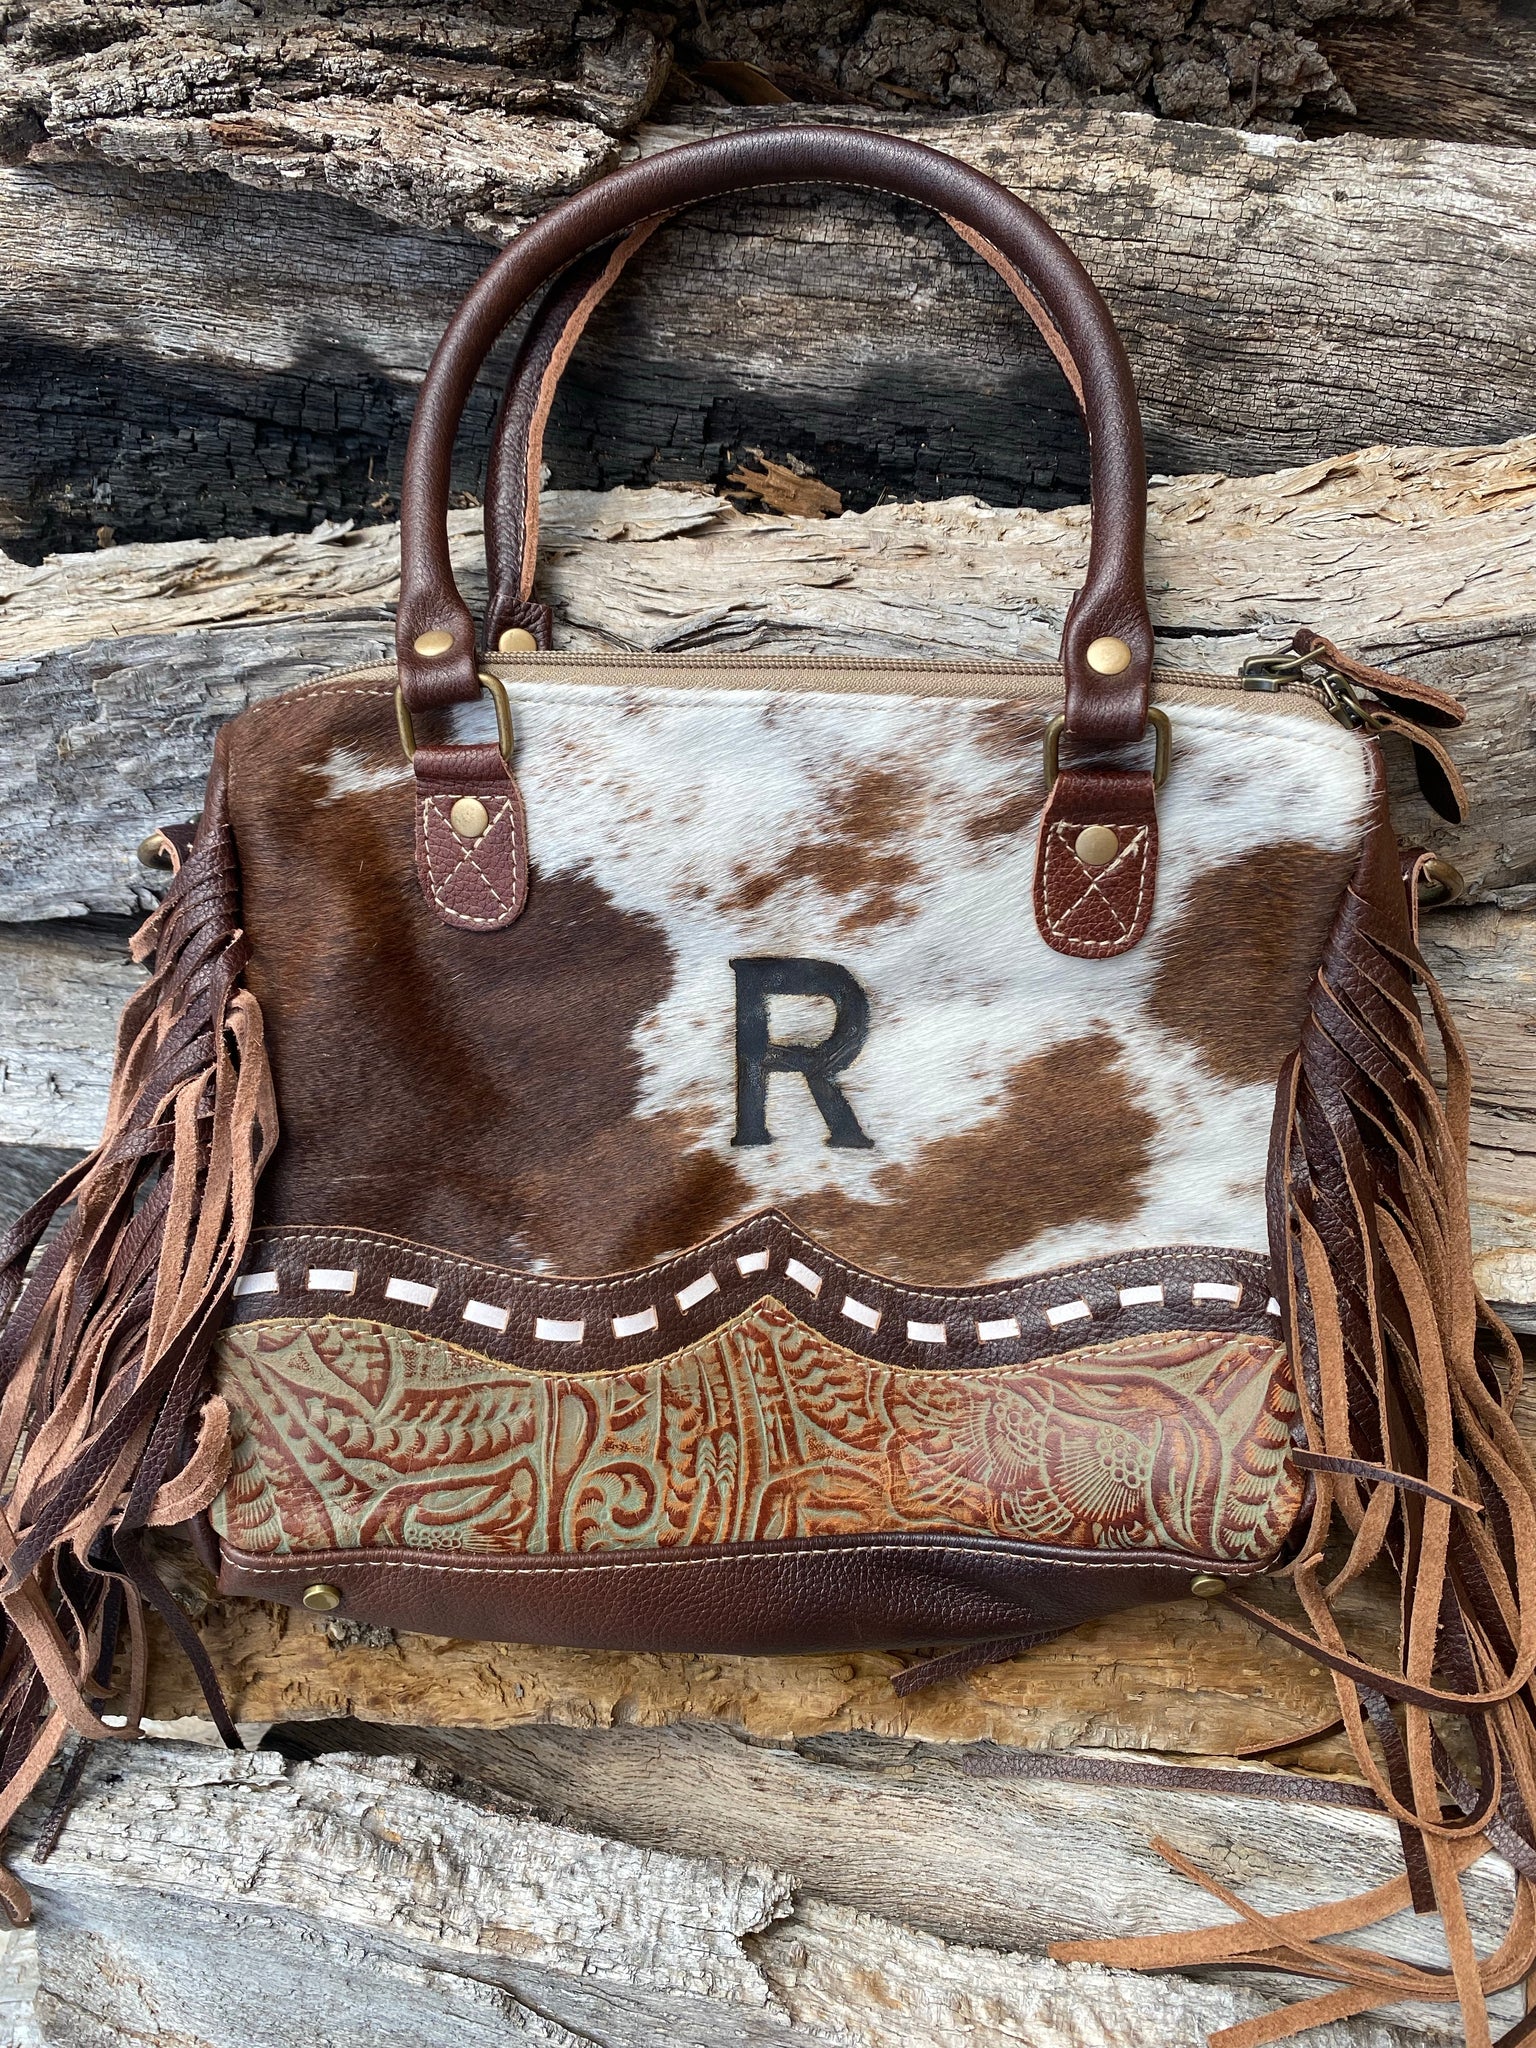 Western Purse, Cowhide Crossbody Purse, Hand Tooled Leather Purse, Cowhide  Purse, Concealed Carry Purse, Hair on Cowhide Shoulder Bag - Etsy